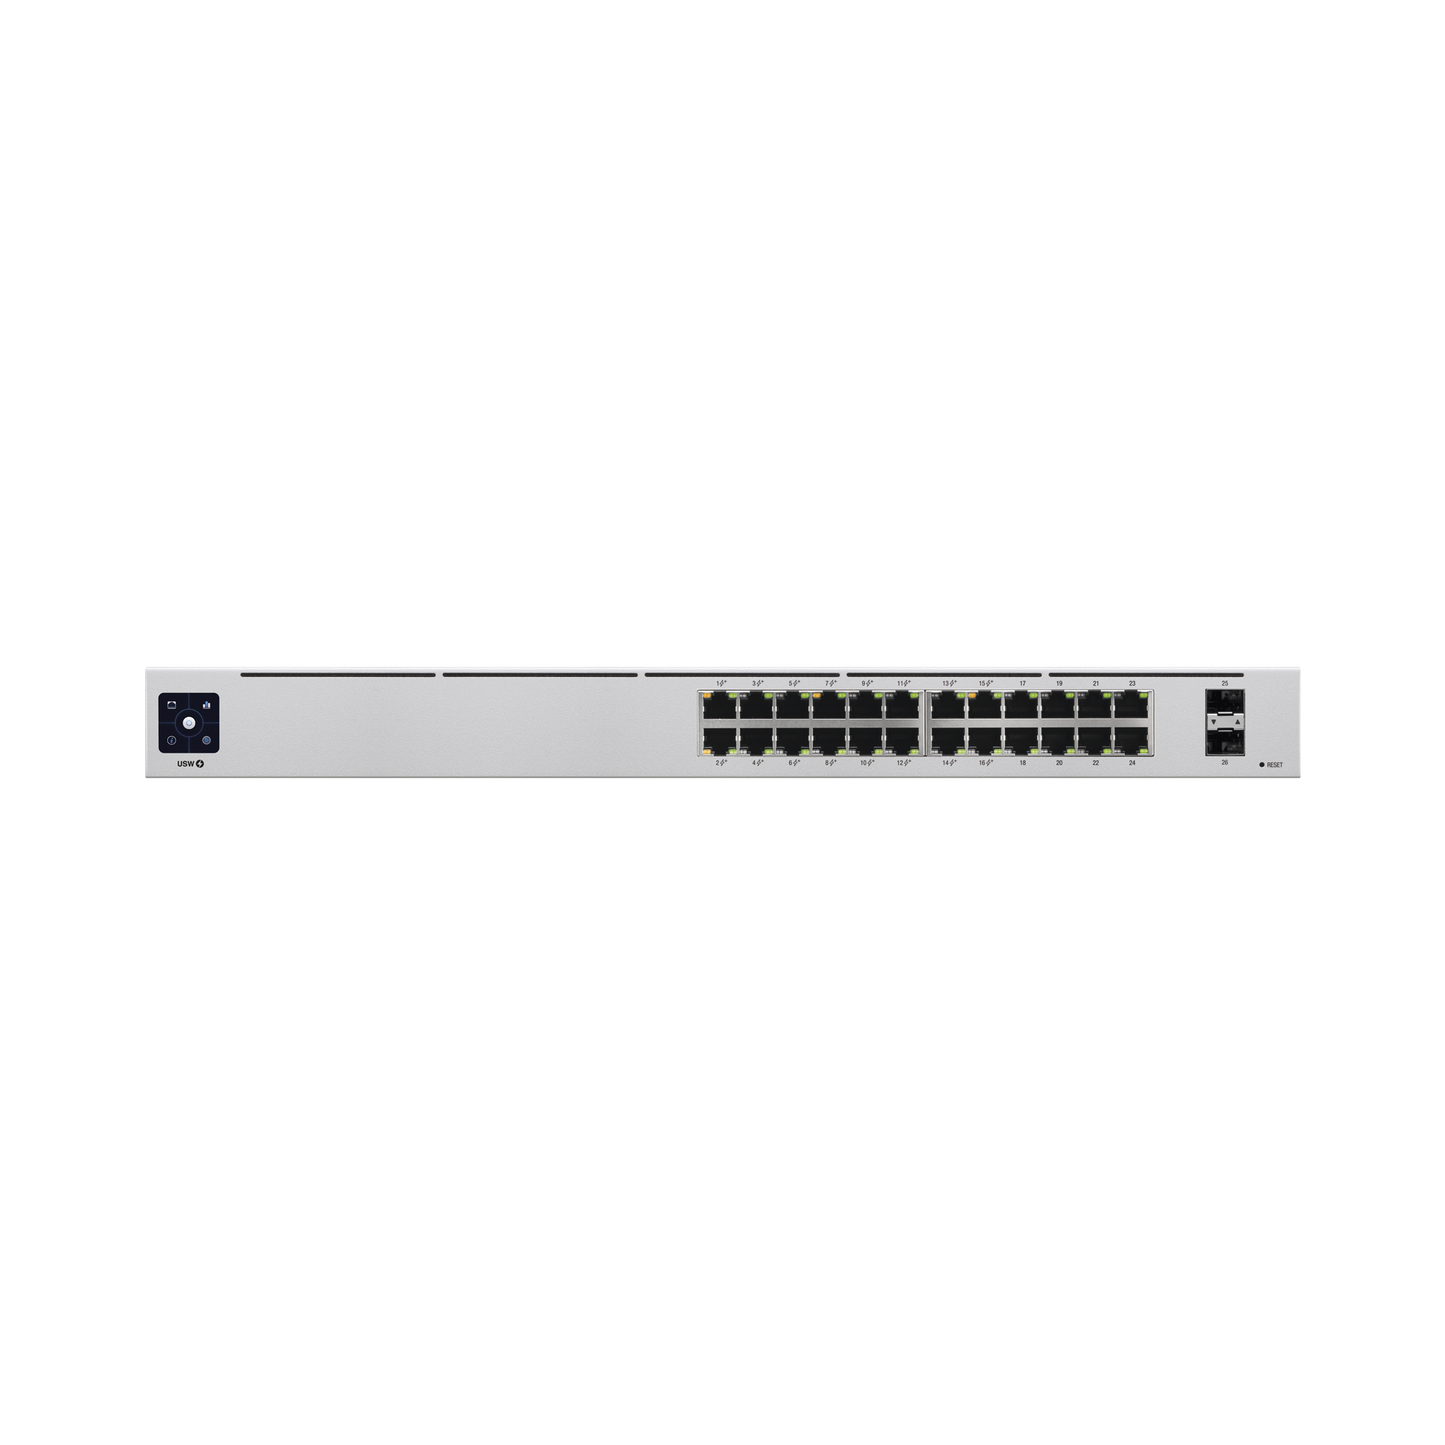 802.3at PoE Gigabit Switch USW-24-POE Gen2 with Layer 2 Features and SFP ports